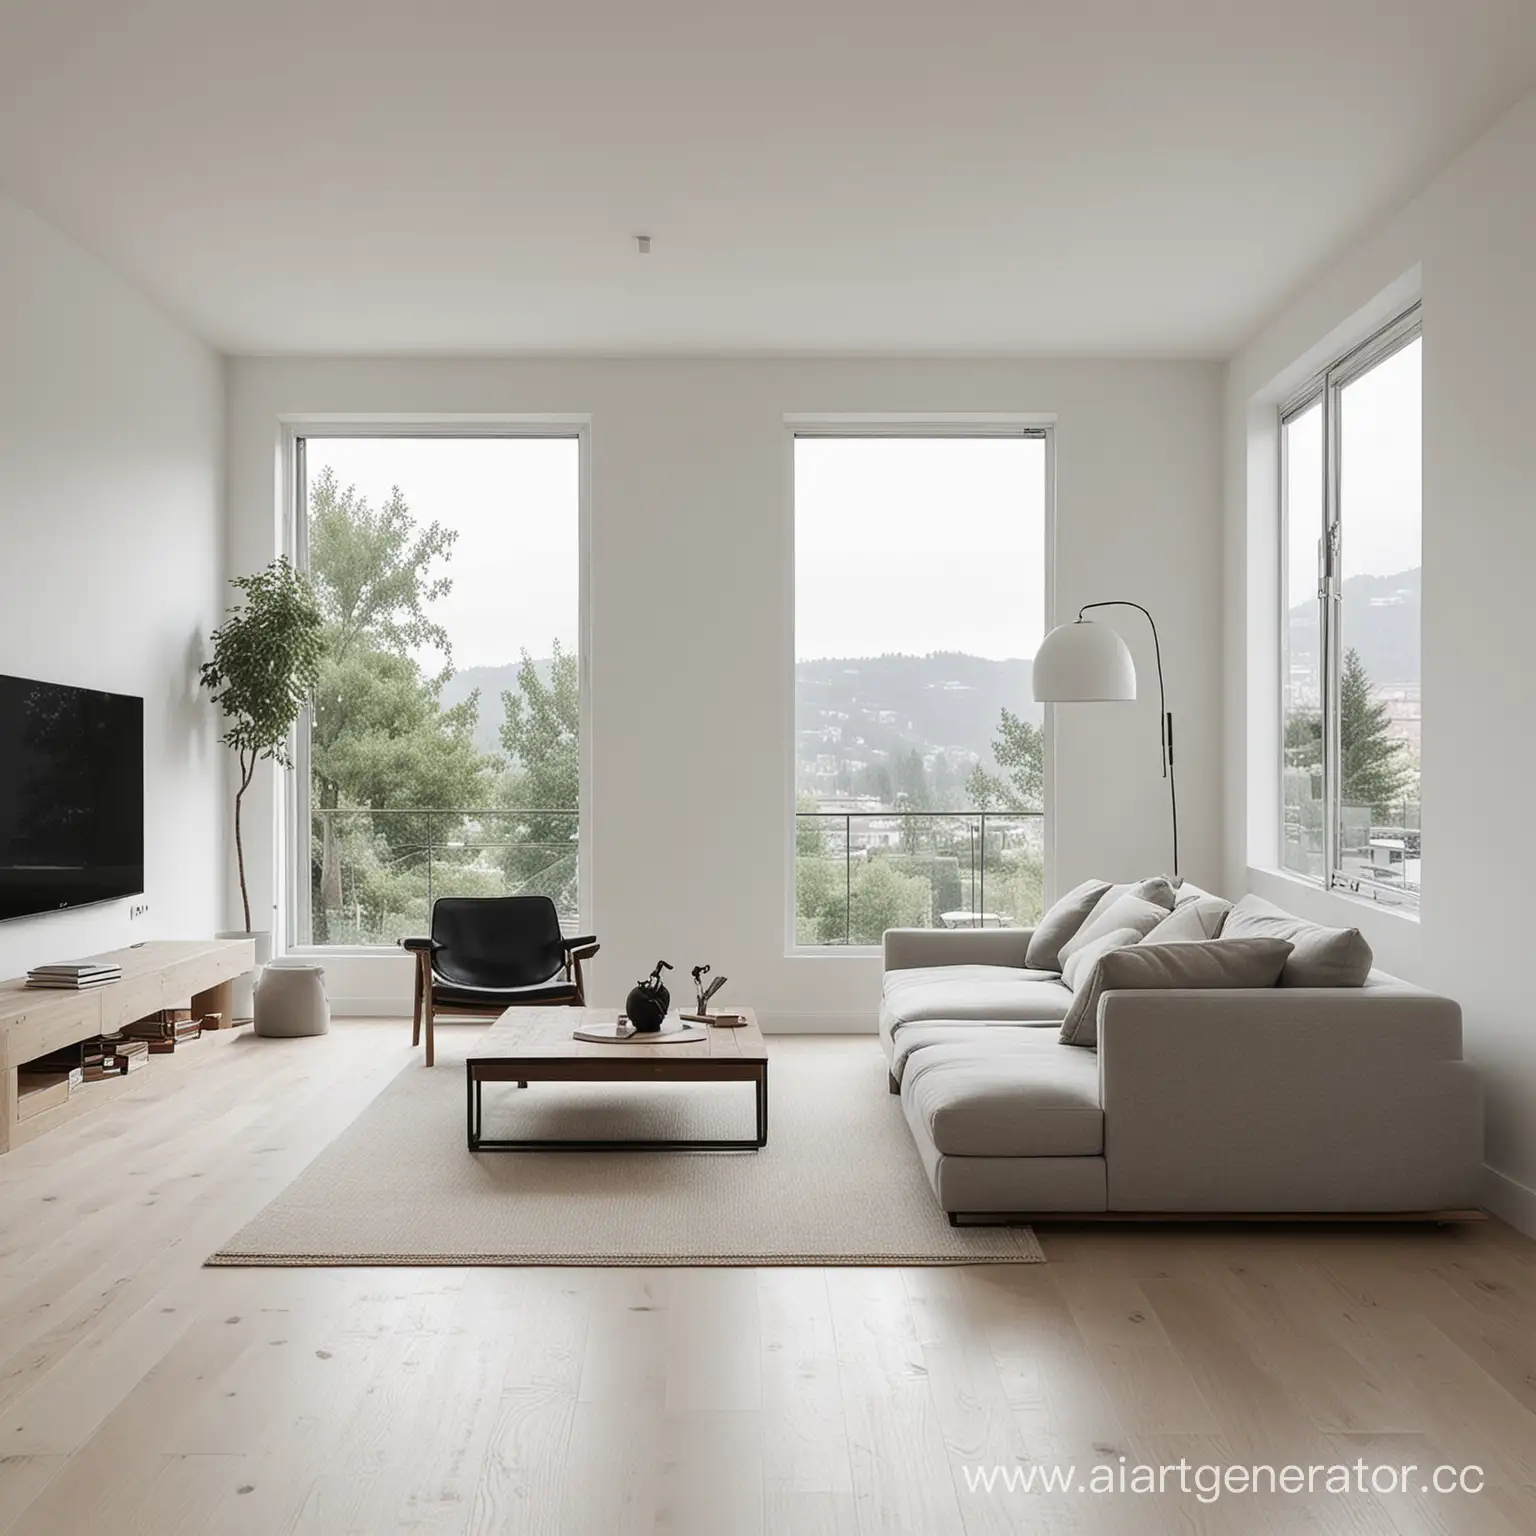 Minimalist-Slanted-View-of-a-Cozy-Living-Room